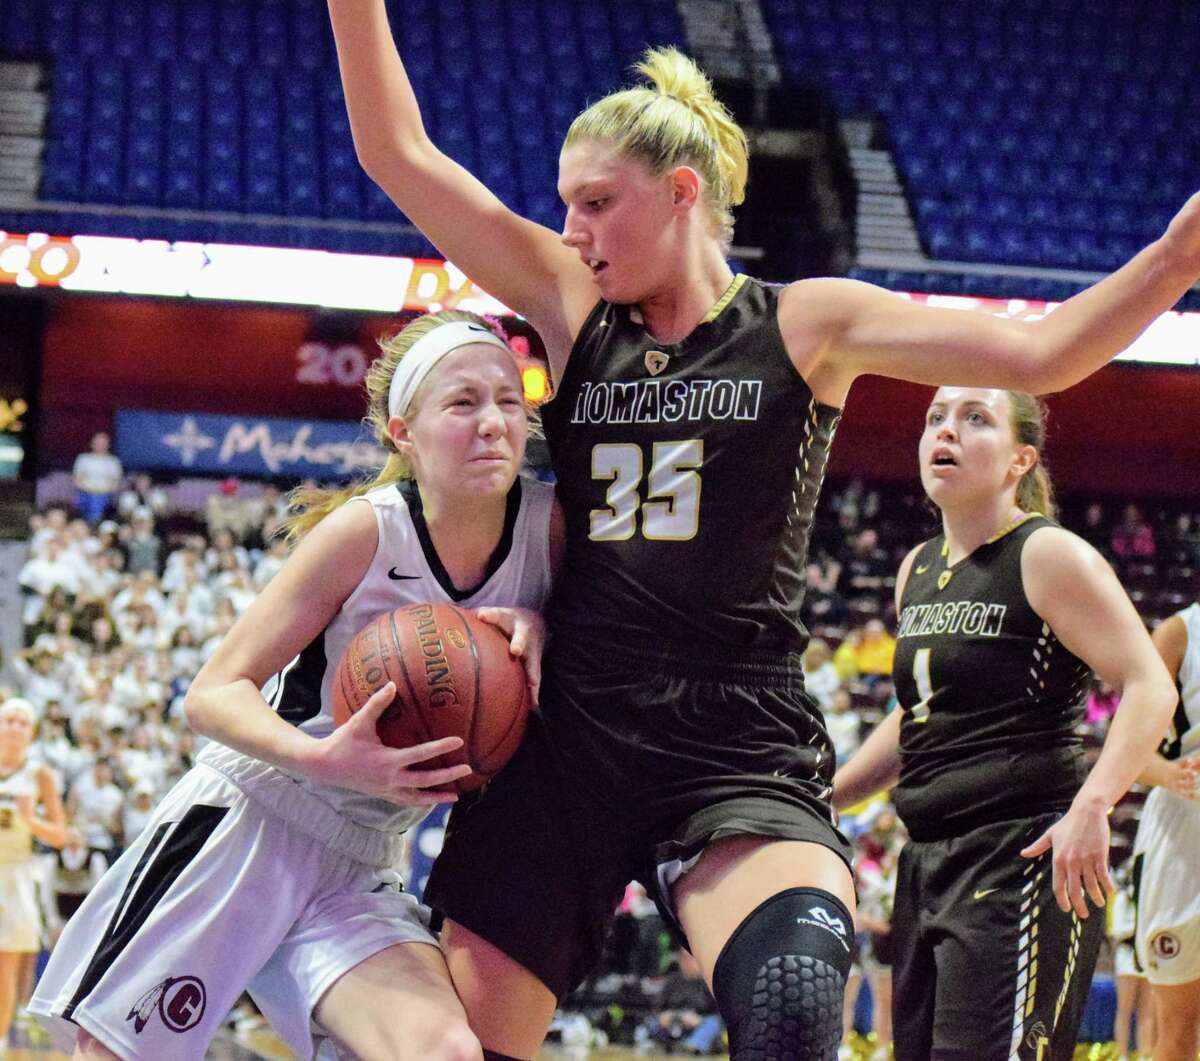 Canton’s Abigail Charron makes contact with Thomaston’s Casey carangelo in the Class S final at Mohegan Sun Arena. (Derek Turner/GameTimeCT)